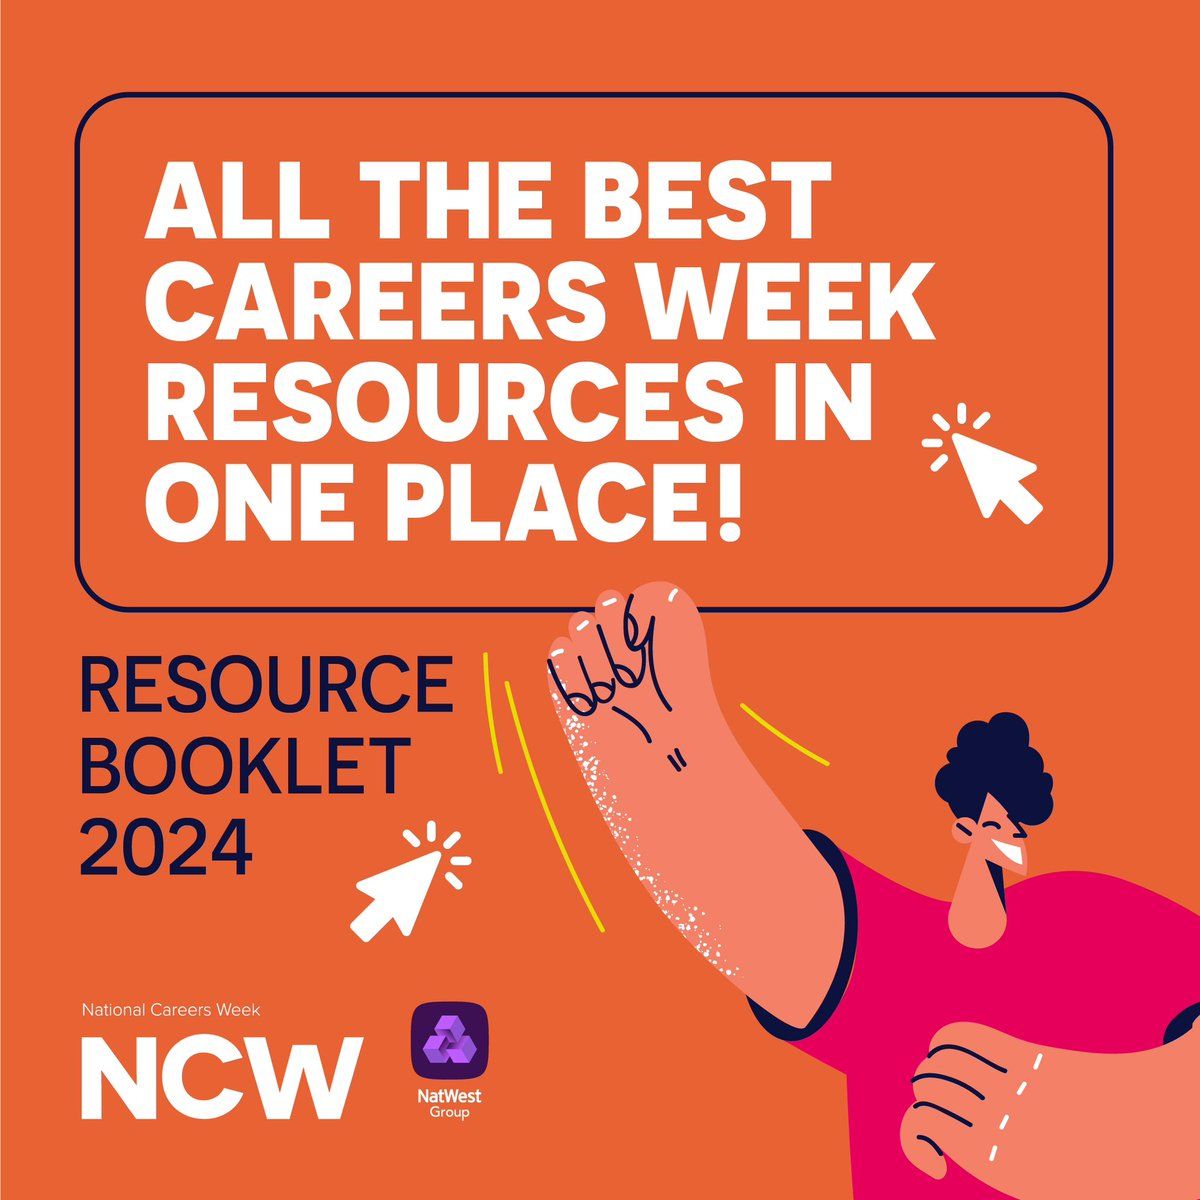 All the best resources in one place.  📕
Great for busy people! 😊
Click to select 🖱️
Download ⤵️ 
Empower 💥 
Engage 👥 
Inspire 🗣️ 
buff.ly/3UnMO9k
#NCW2024